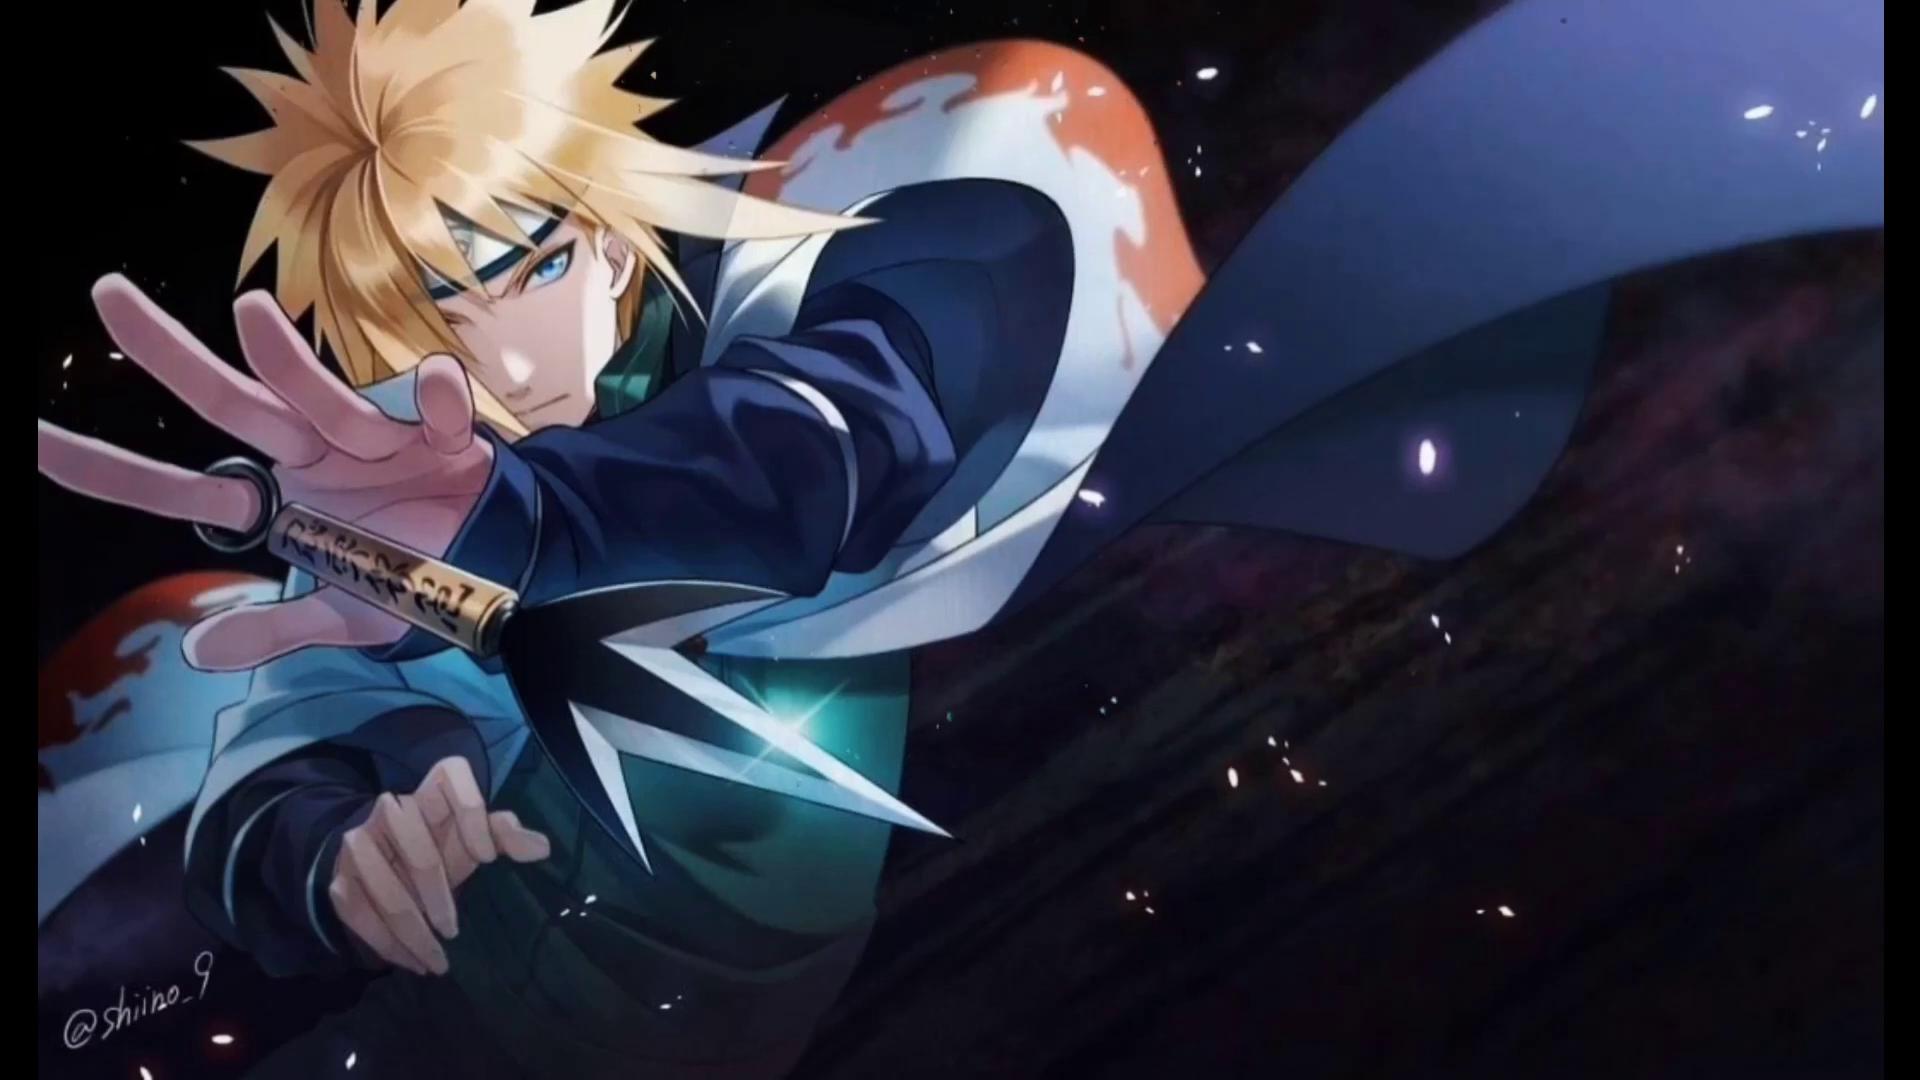 210+ Minato Namikaze HD Wallpapers and Backgrounds